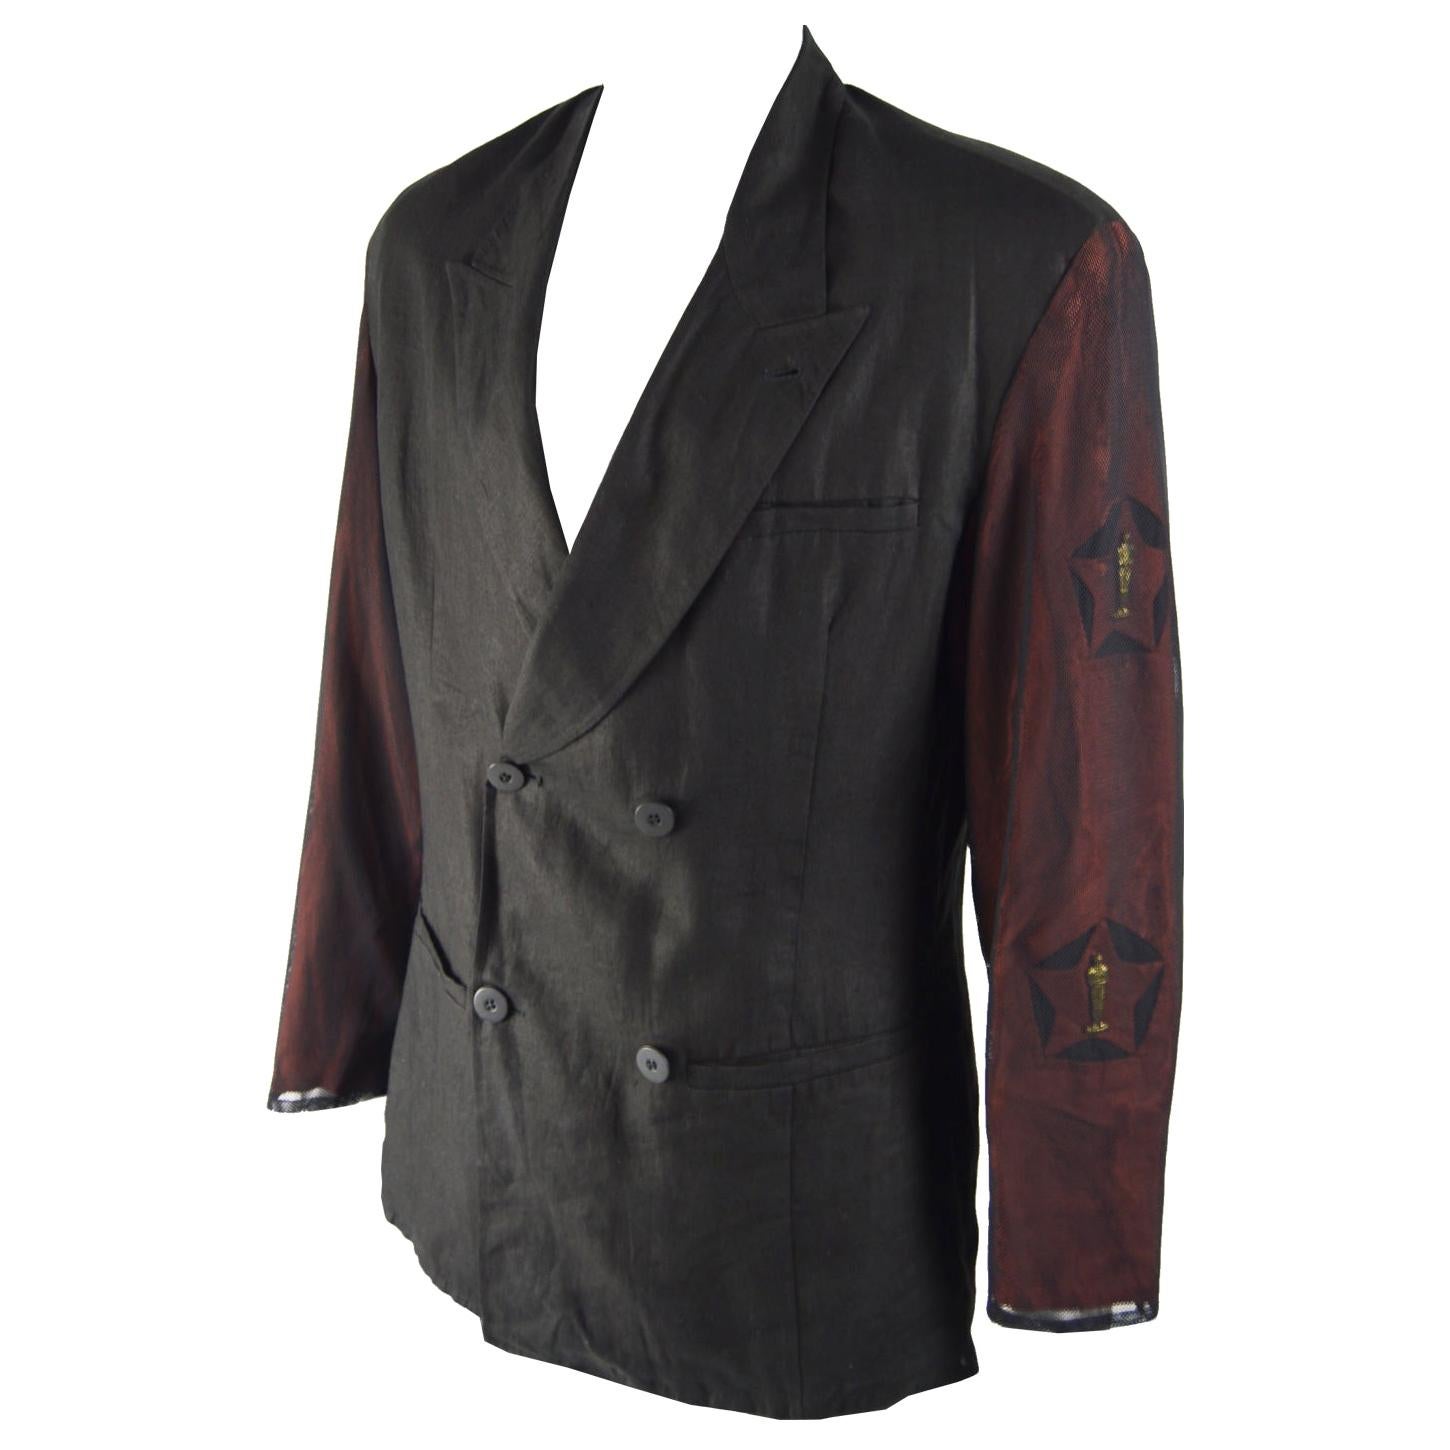 An amazing and ultra rare vintage mens blazer jacket from the 80s by genius Italian fashion designer duo, Calugi e Giannelli. In a black linen with red cut out sleeves that are embellished with Oscar statues and then covered in mesh for a